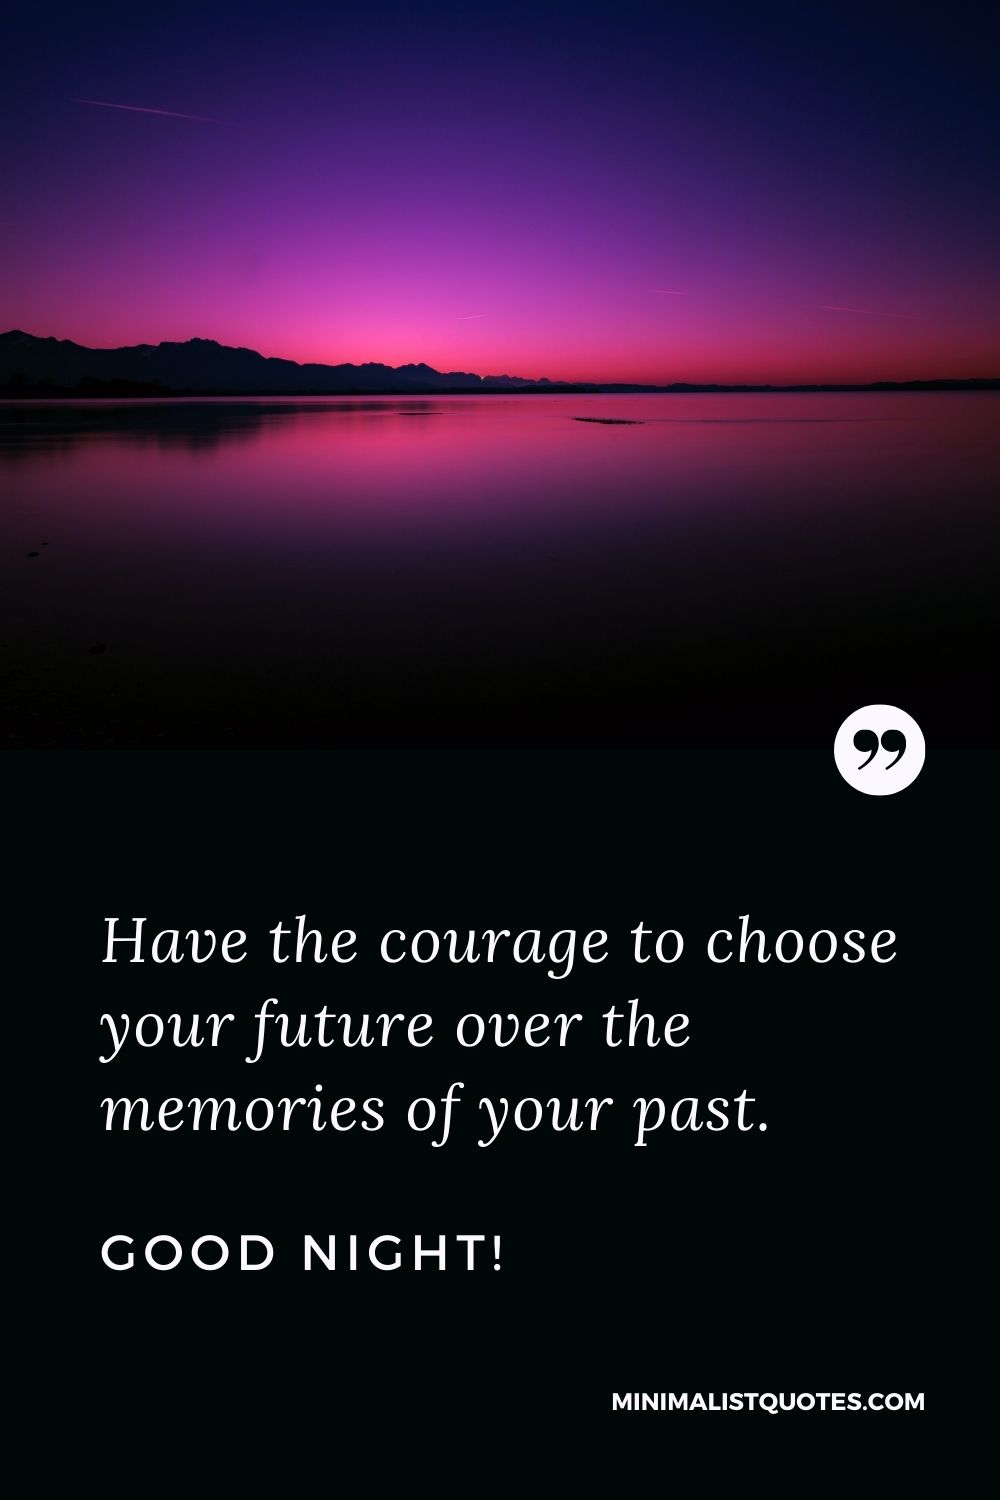 Night Quote, Wish & Message With Image: Have the courage to choose your future over the memories of your past. Good Night!